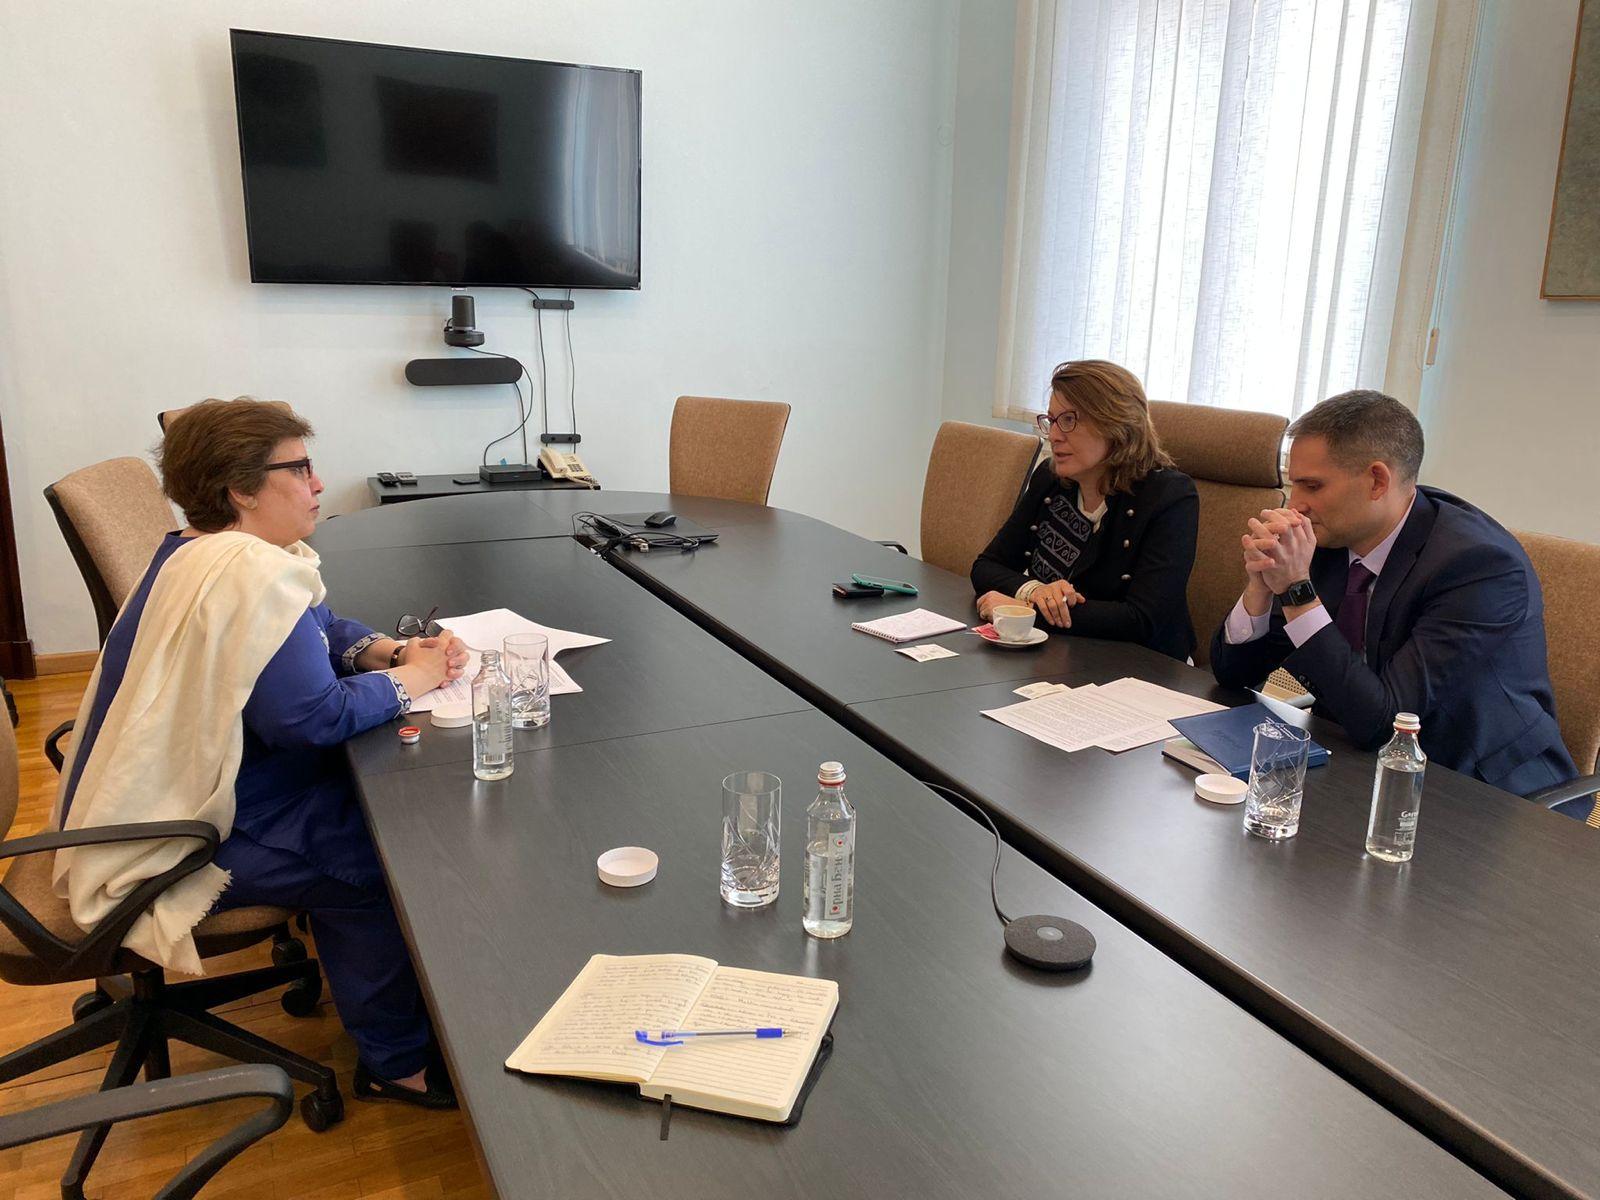 ​Ms. Mariam Aftab, Ambassador of Pakistan to Bulgaria met with Ms. Vessela Tcherneva, Foreign Policy Advisor, and Mr. Petar Petrov, Security Advisor to the Prime Minister of Bulgaria today.